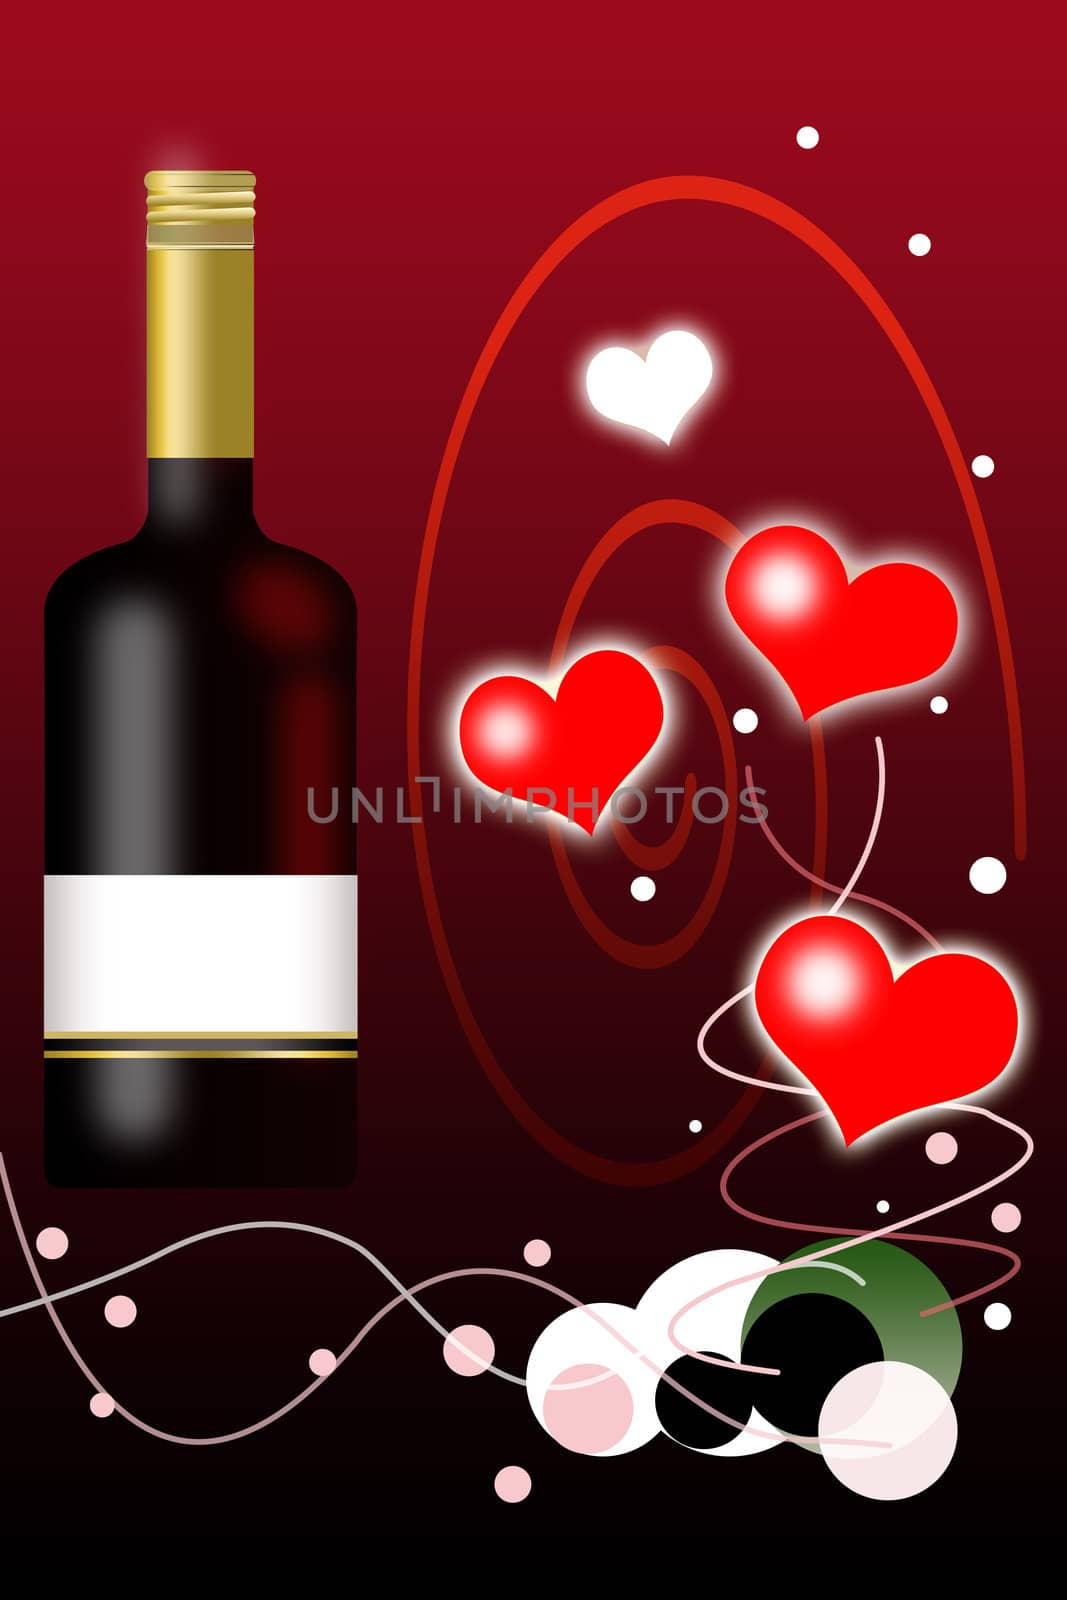 Valentines Day Background and Wine Bottle with Blank Label Illustrationii. 